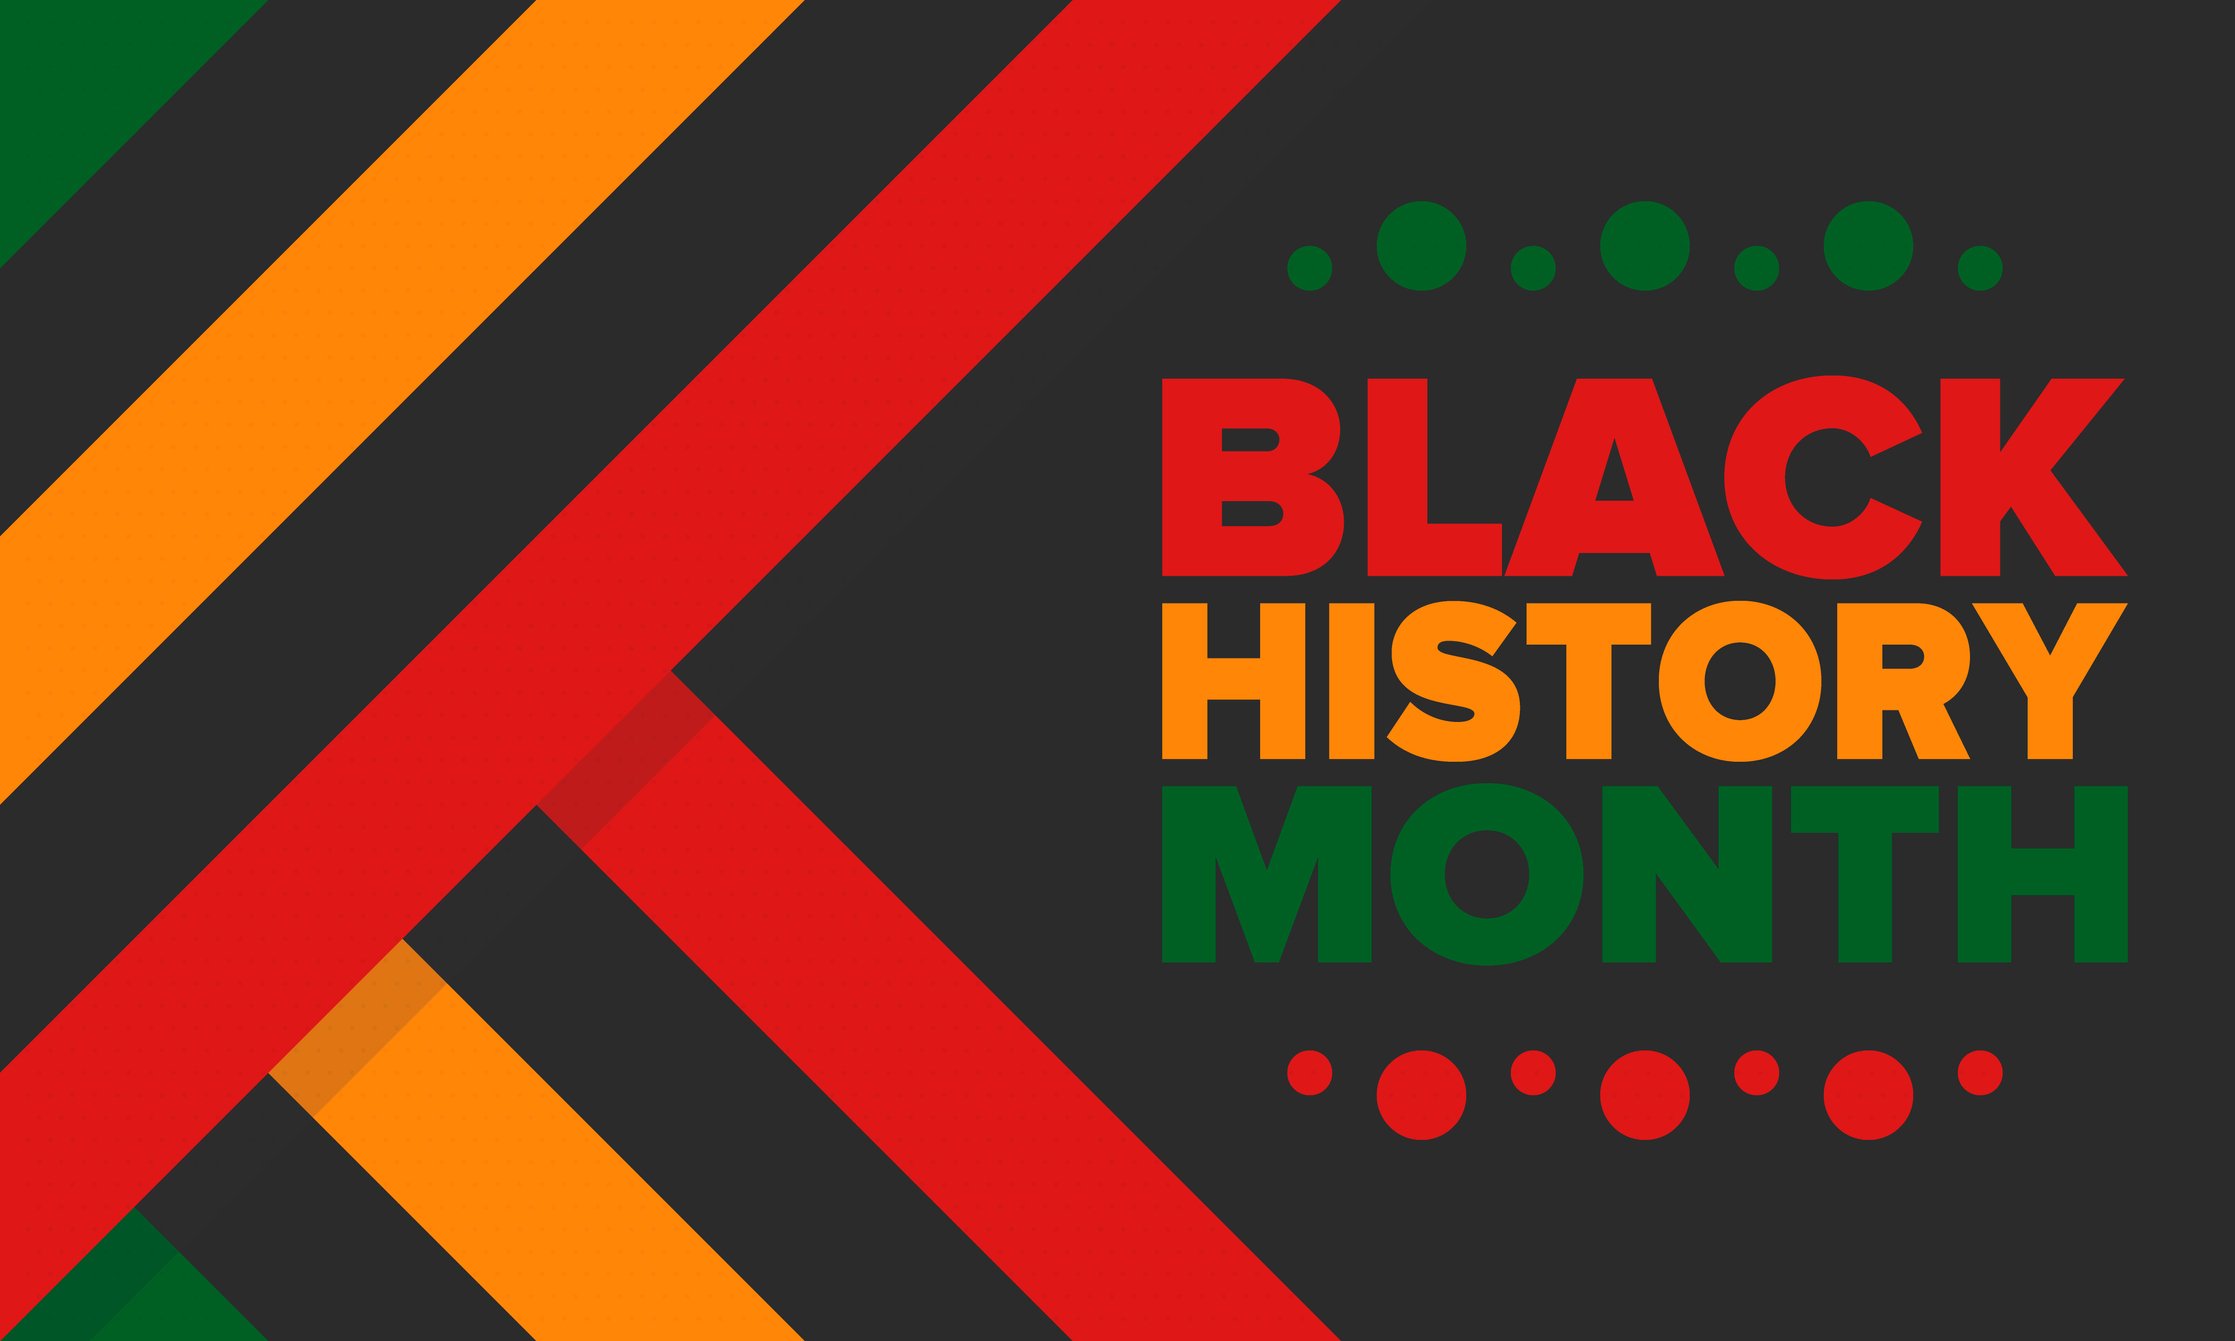 What is Black History Month?